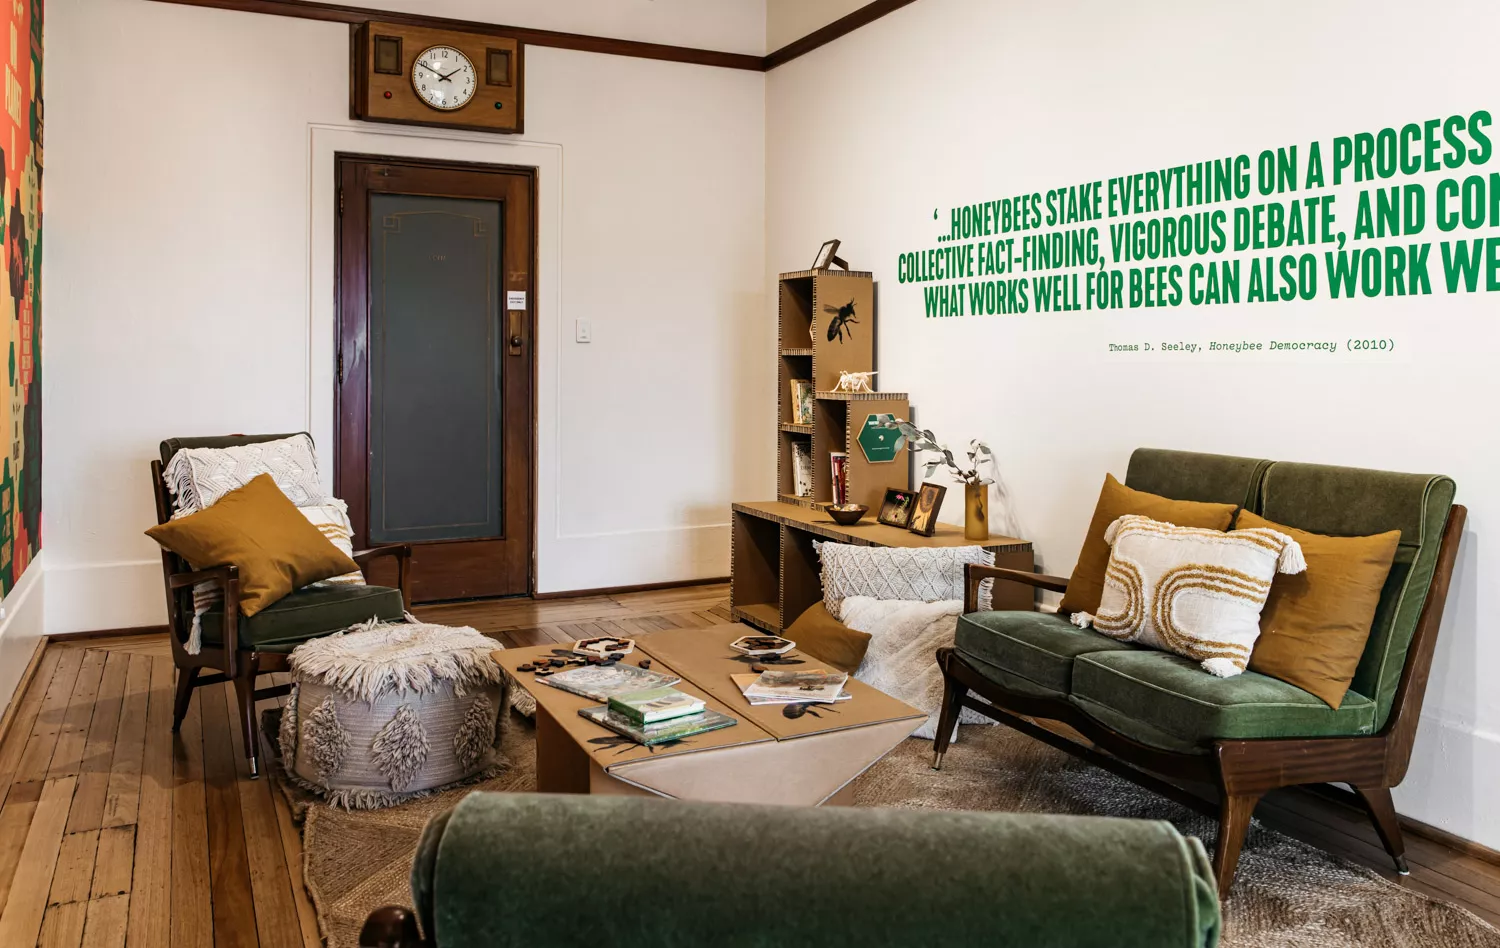 A room with green couches, cushions on the floor and books on the bookshelf. 